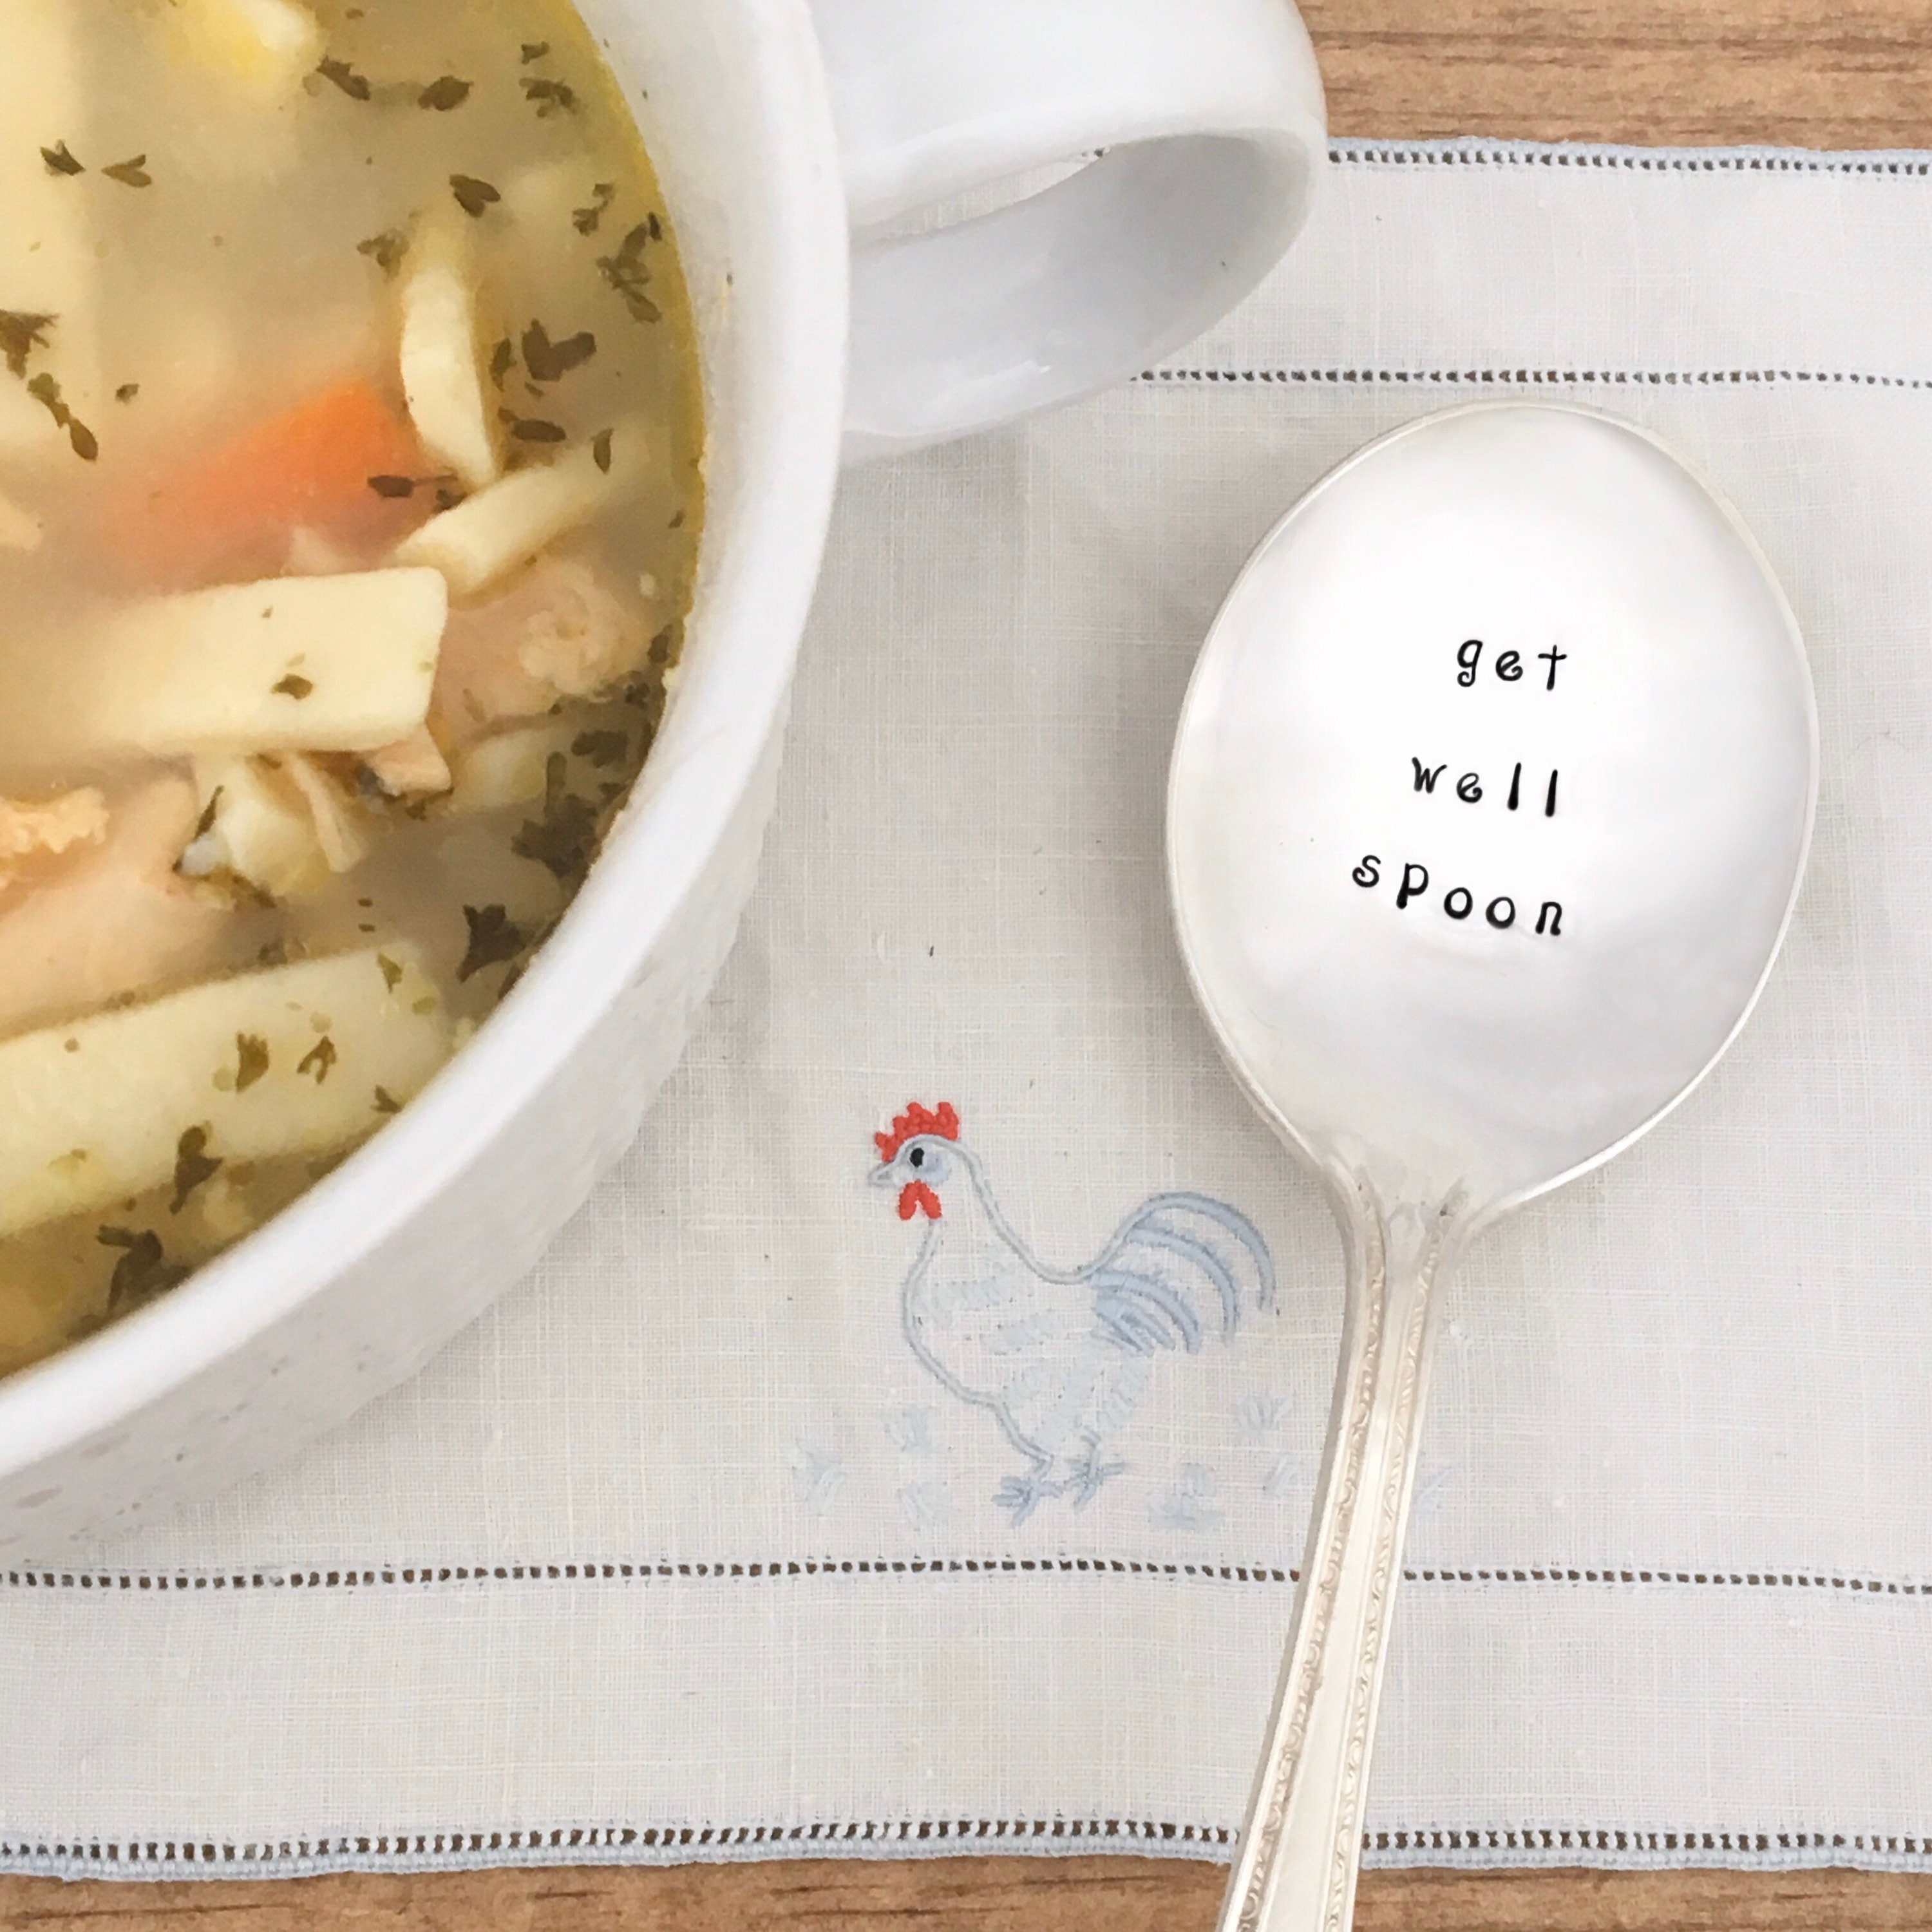 Vintage Silver Soup Spoon Get Well Spoon Hand Stamped image